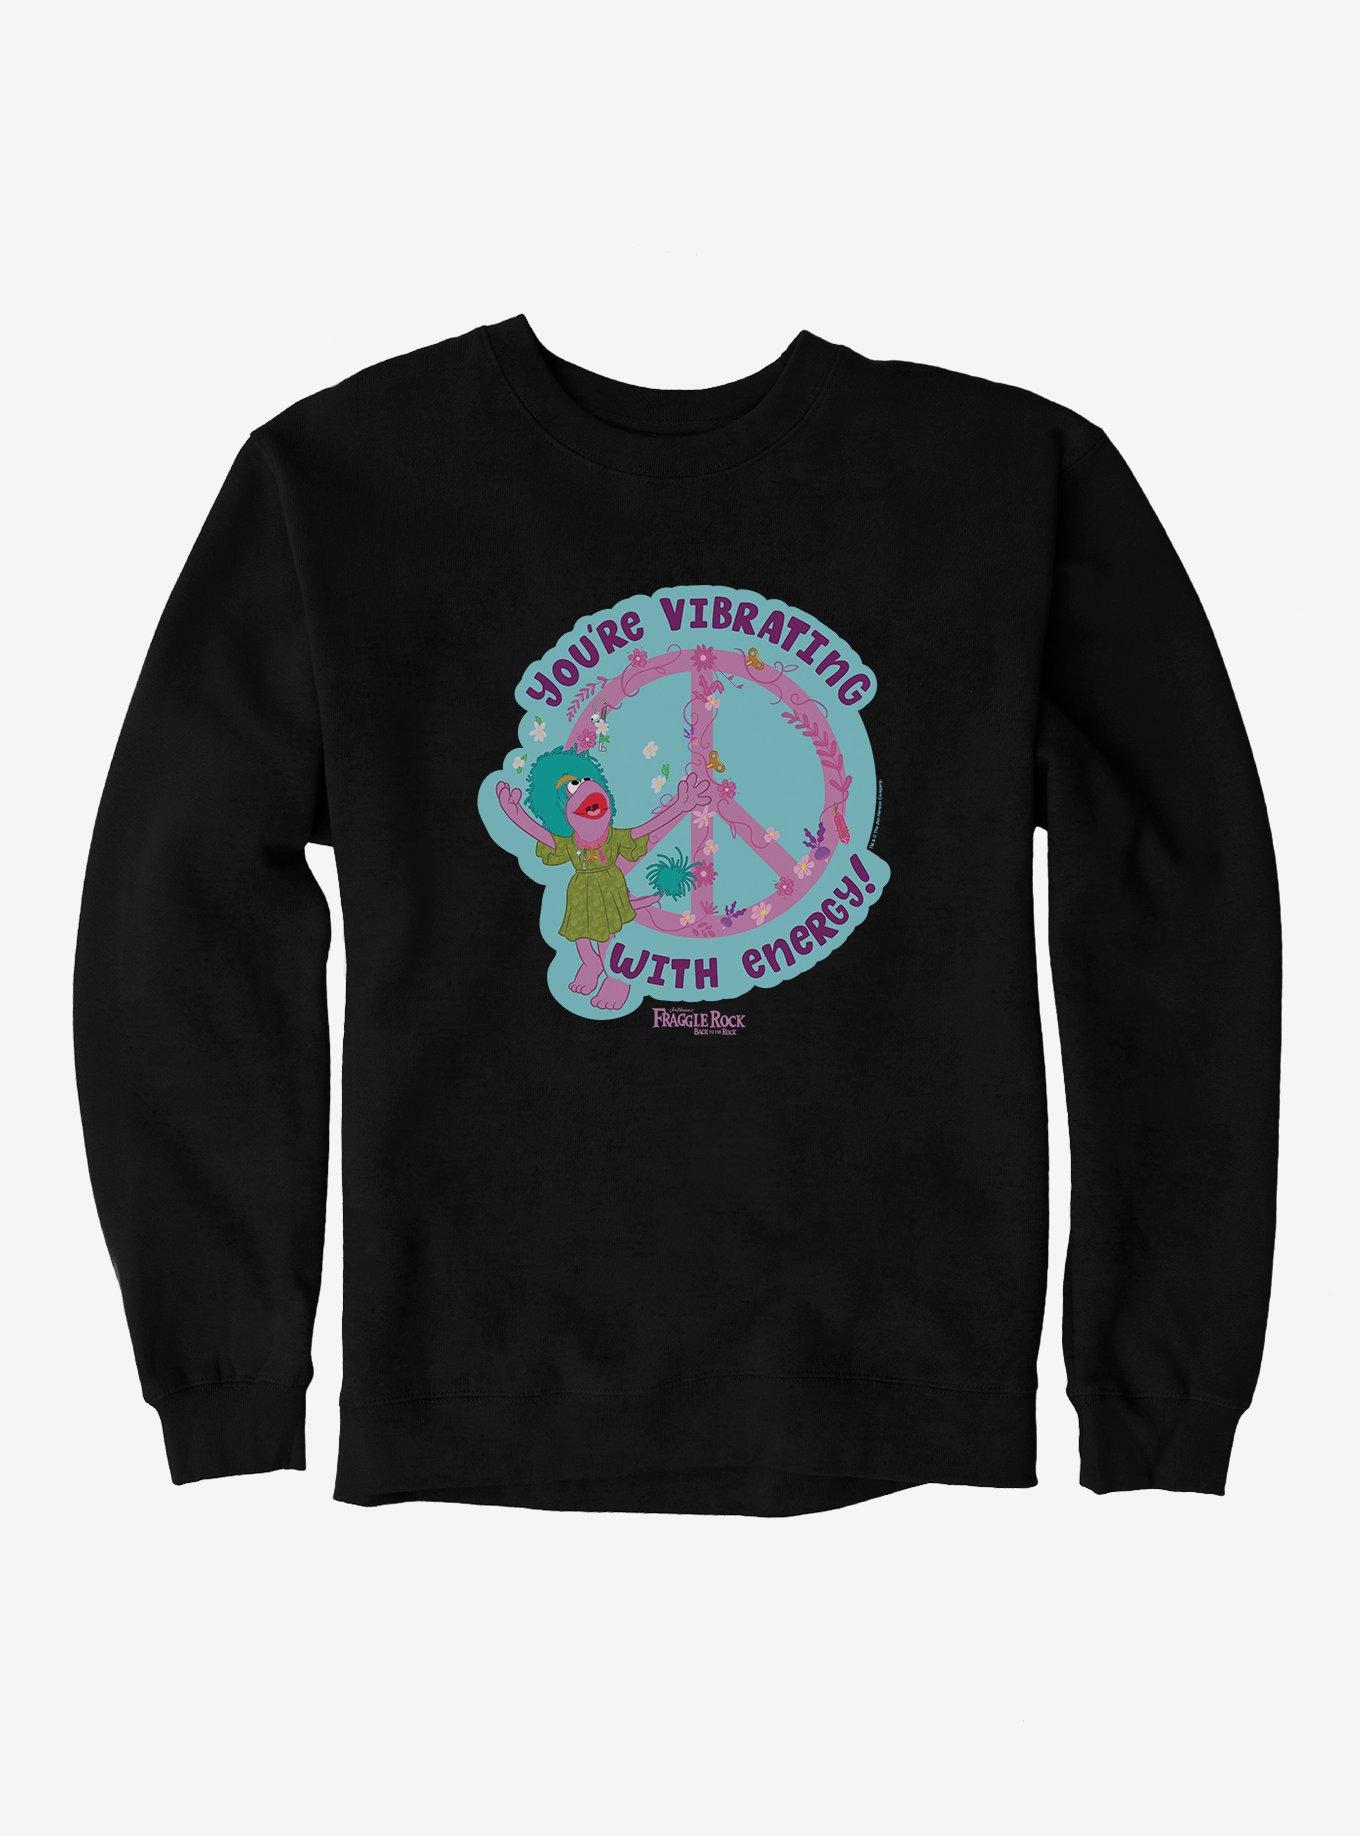 Fraggle Rock Back To The You're Vibrating With Energy! Sweatshirt